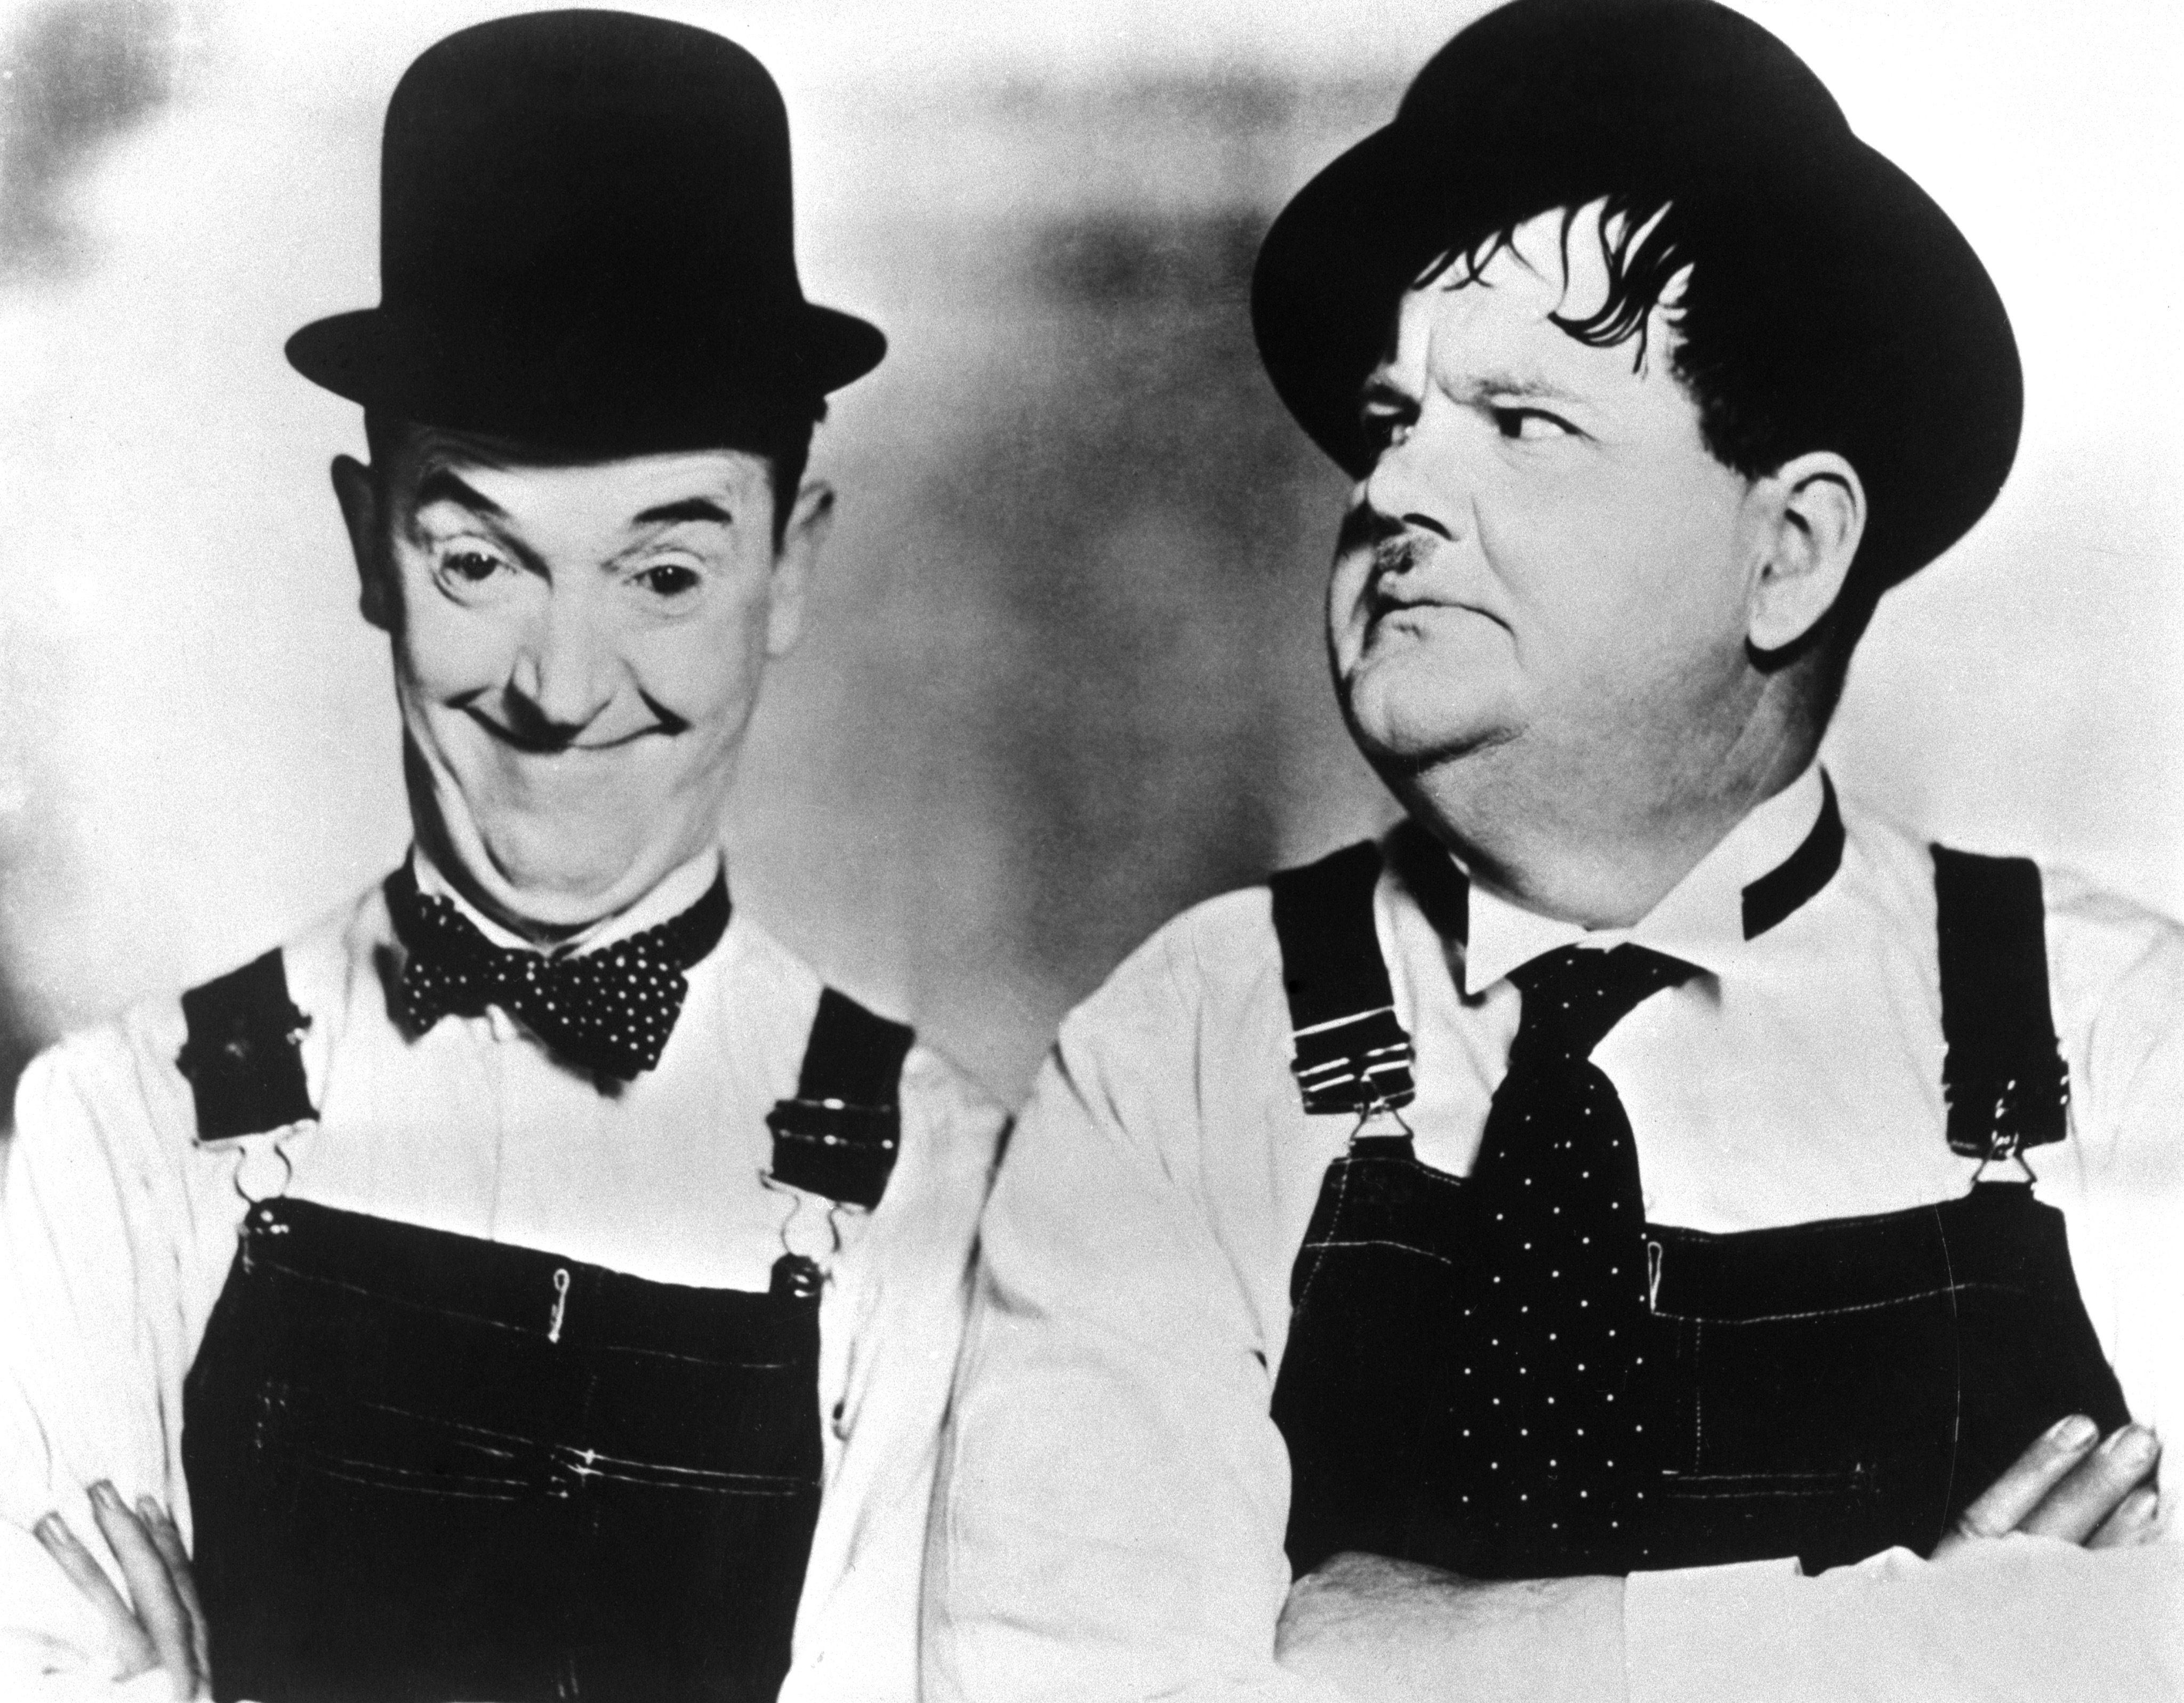 Laurel and Hardy in costume